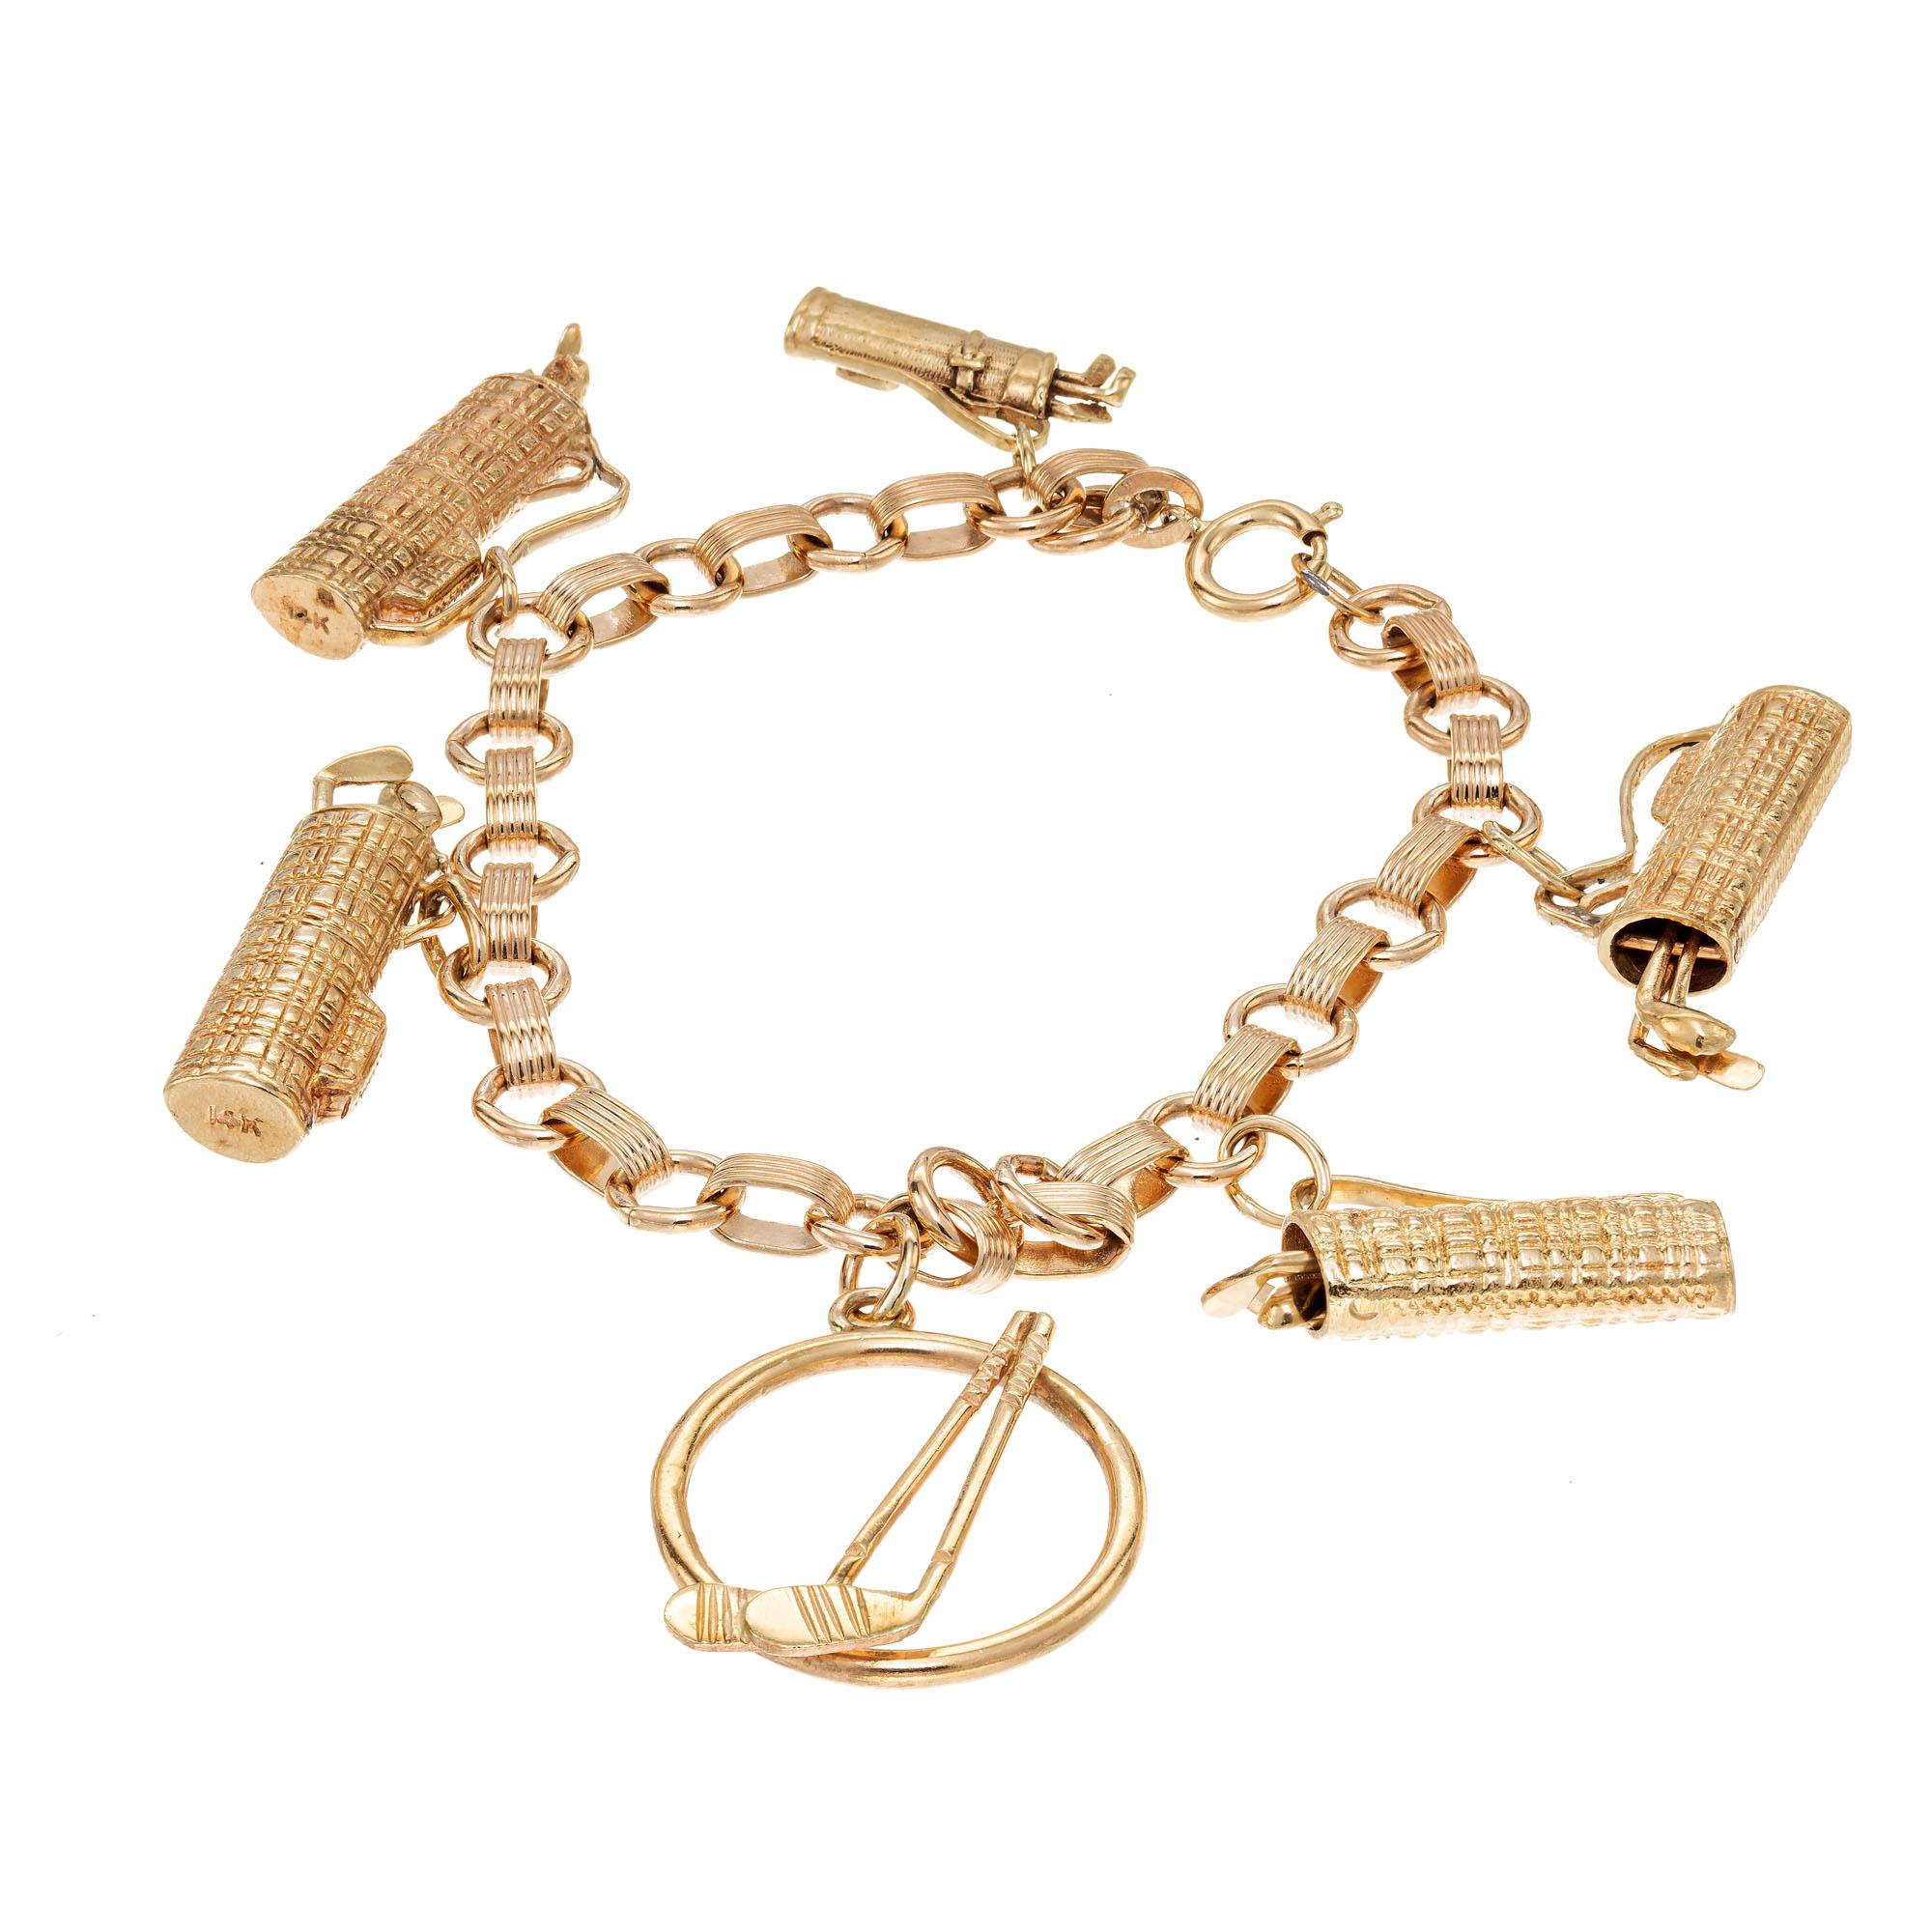 Gold theme charm bracelet with six solid 14k yellow gold golf charms on a rose gold link bracelet. Four of the charms have movable golf clubs. 7 inches in length

14k yellow gold 
14k rose gold
26.9 grams
Bracelet: 7 Inches 
Width: